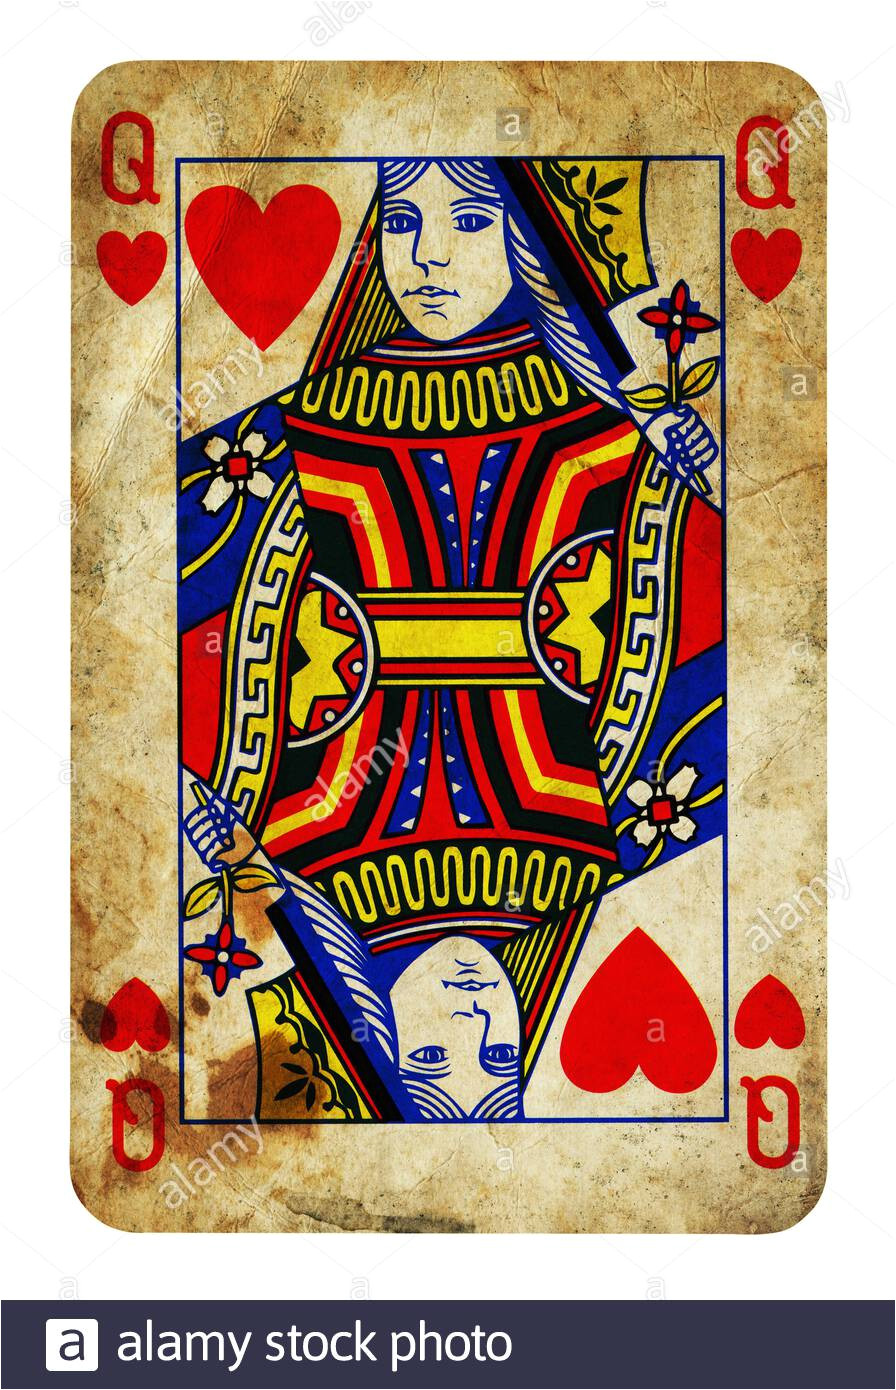 queen of hearts vintage playing card isolated on white clipping path included 2arg2w9 jpg